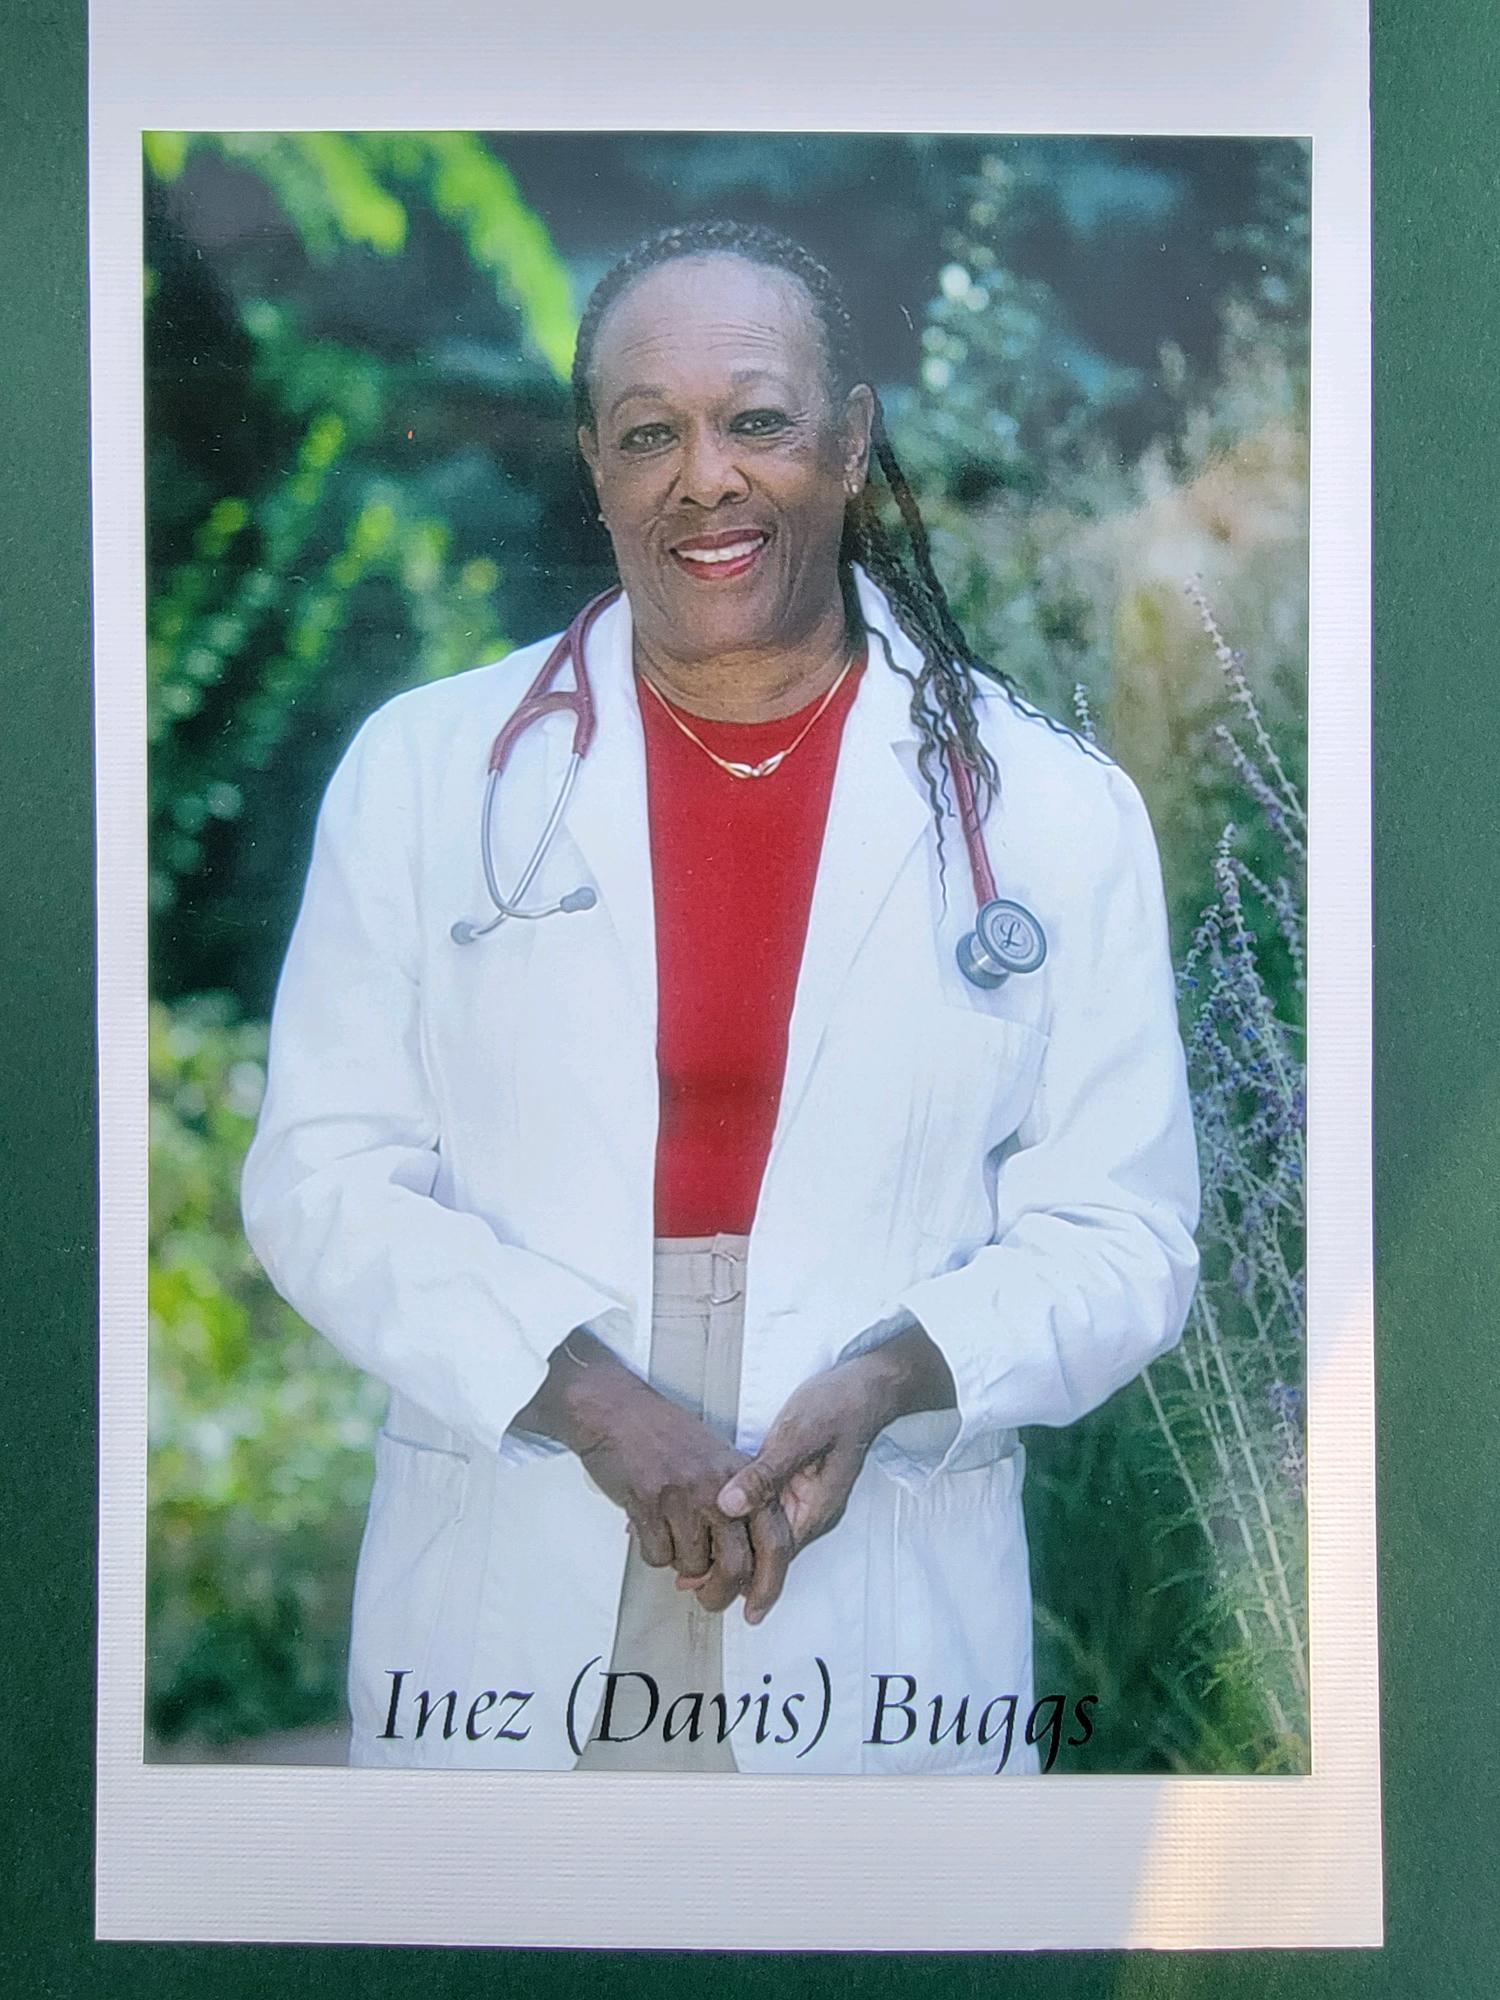 Inez (Davis) Buggs portrait in a white lab coat and stethoscope, wearing a red shirt underneath